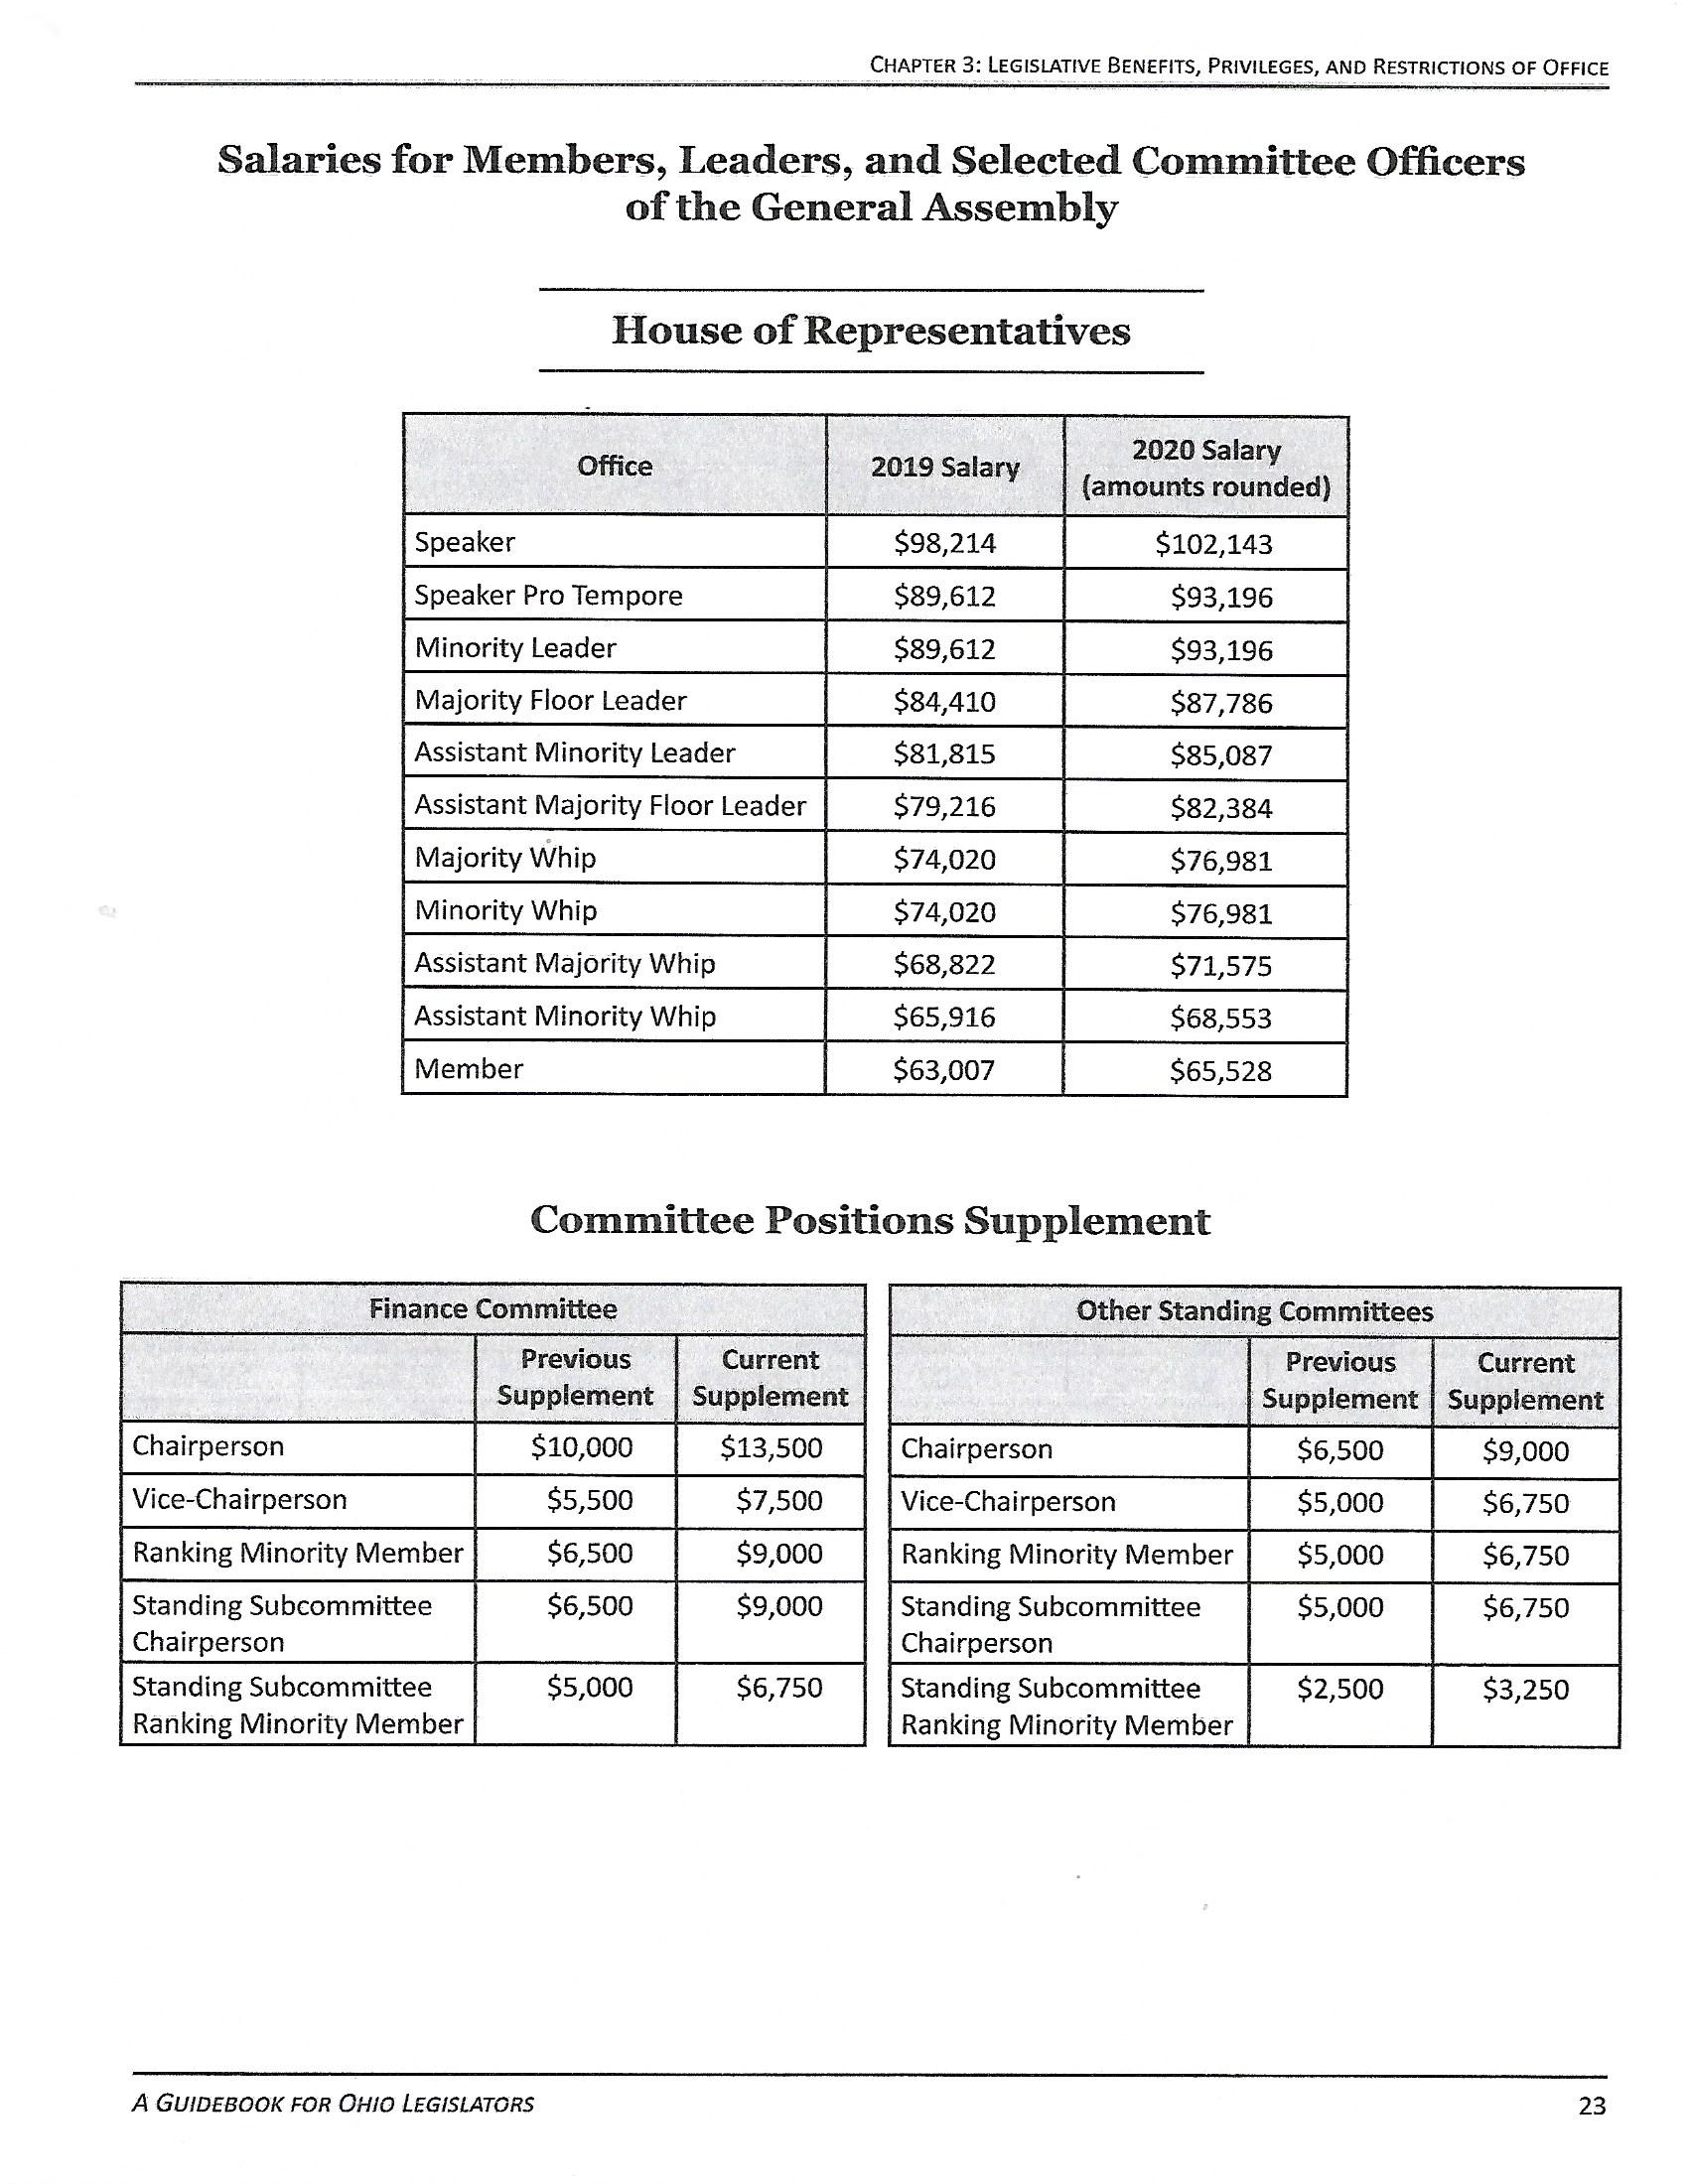 STATE HOUSE OF REP COMPENSATION